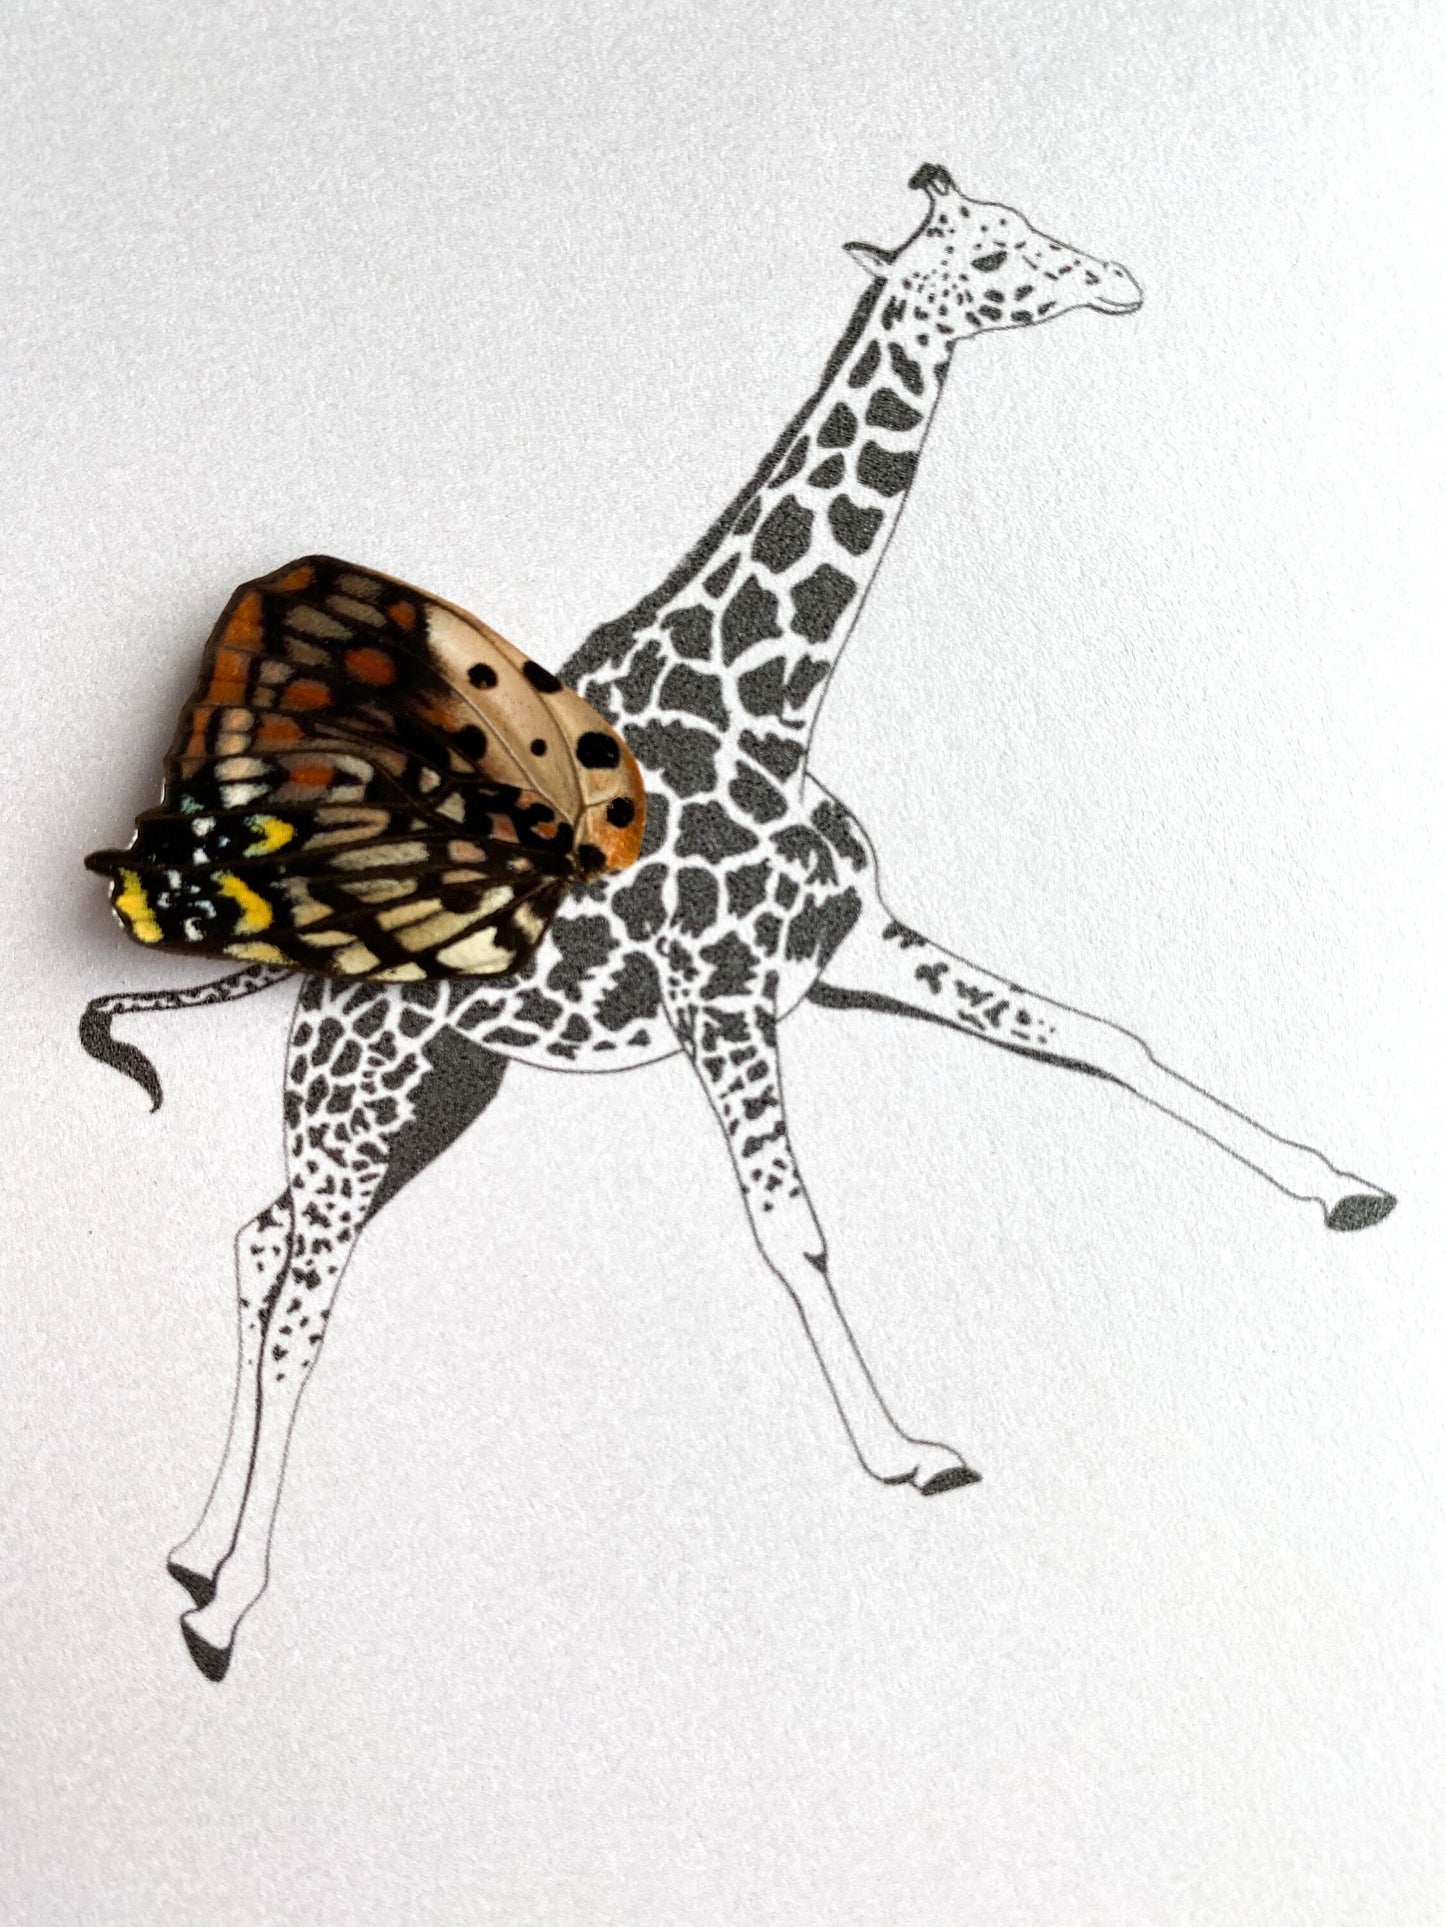 Giraffe Real Butterfly Wing Framed Art Ethically Sourced Made in MN USA - Holly Ulm - Isms Butterfly Conservation Art